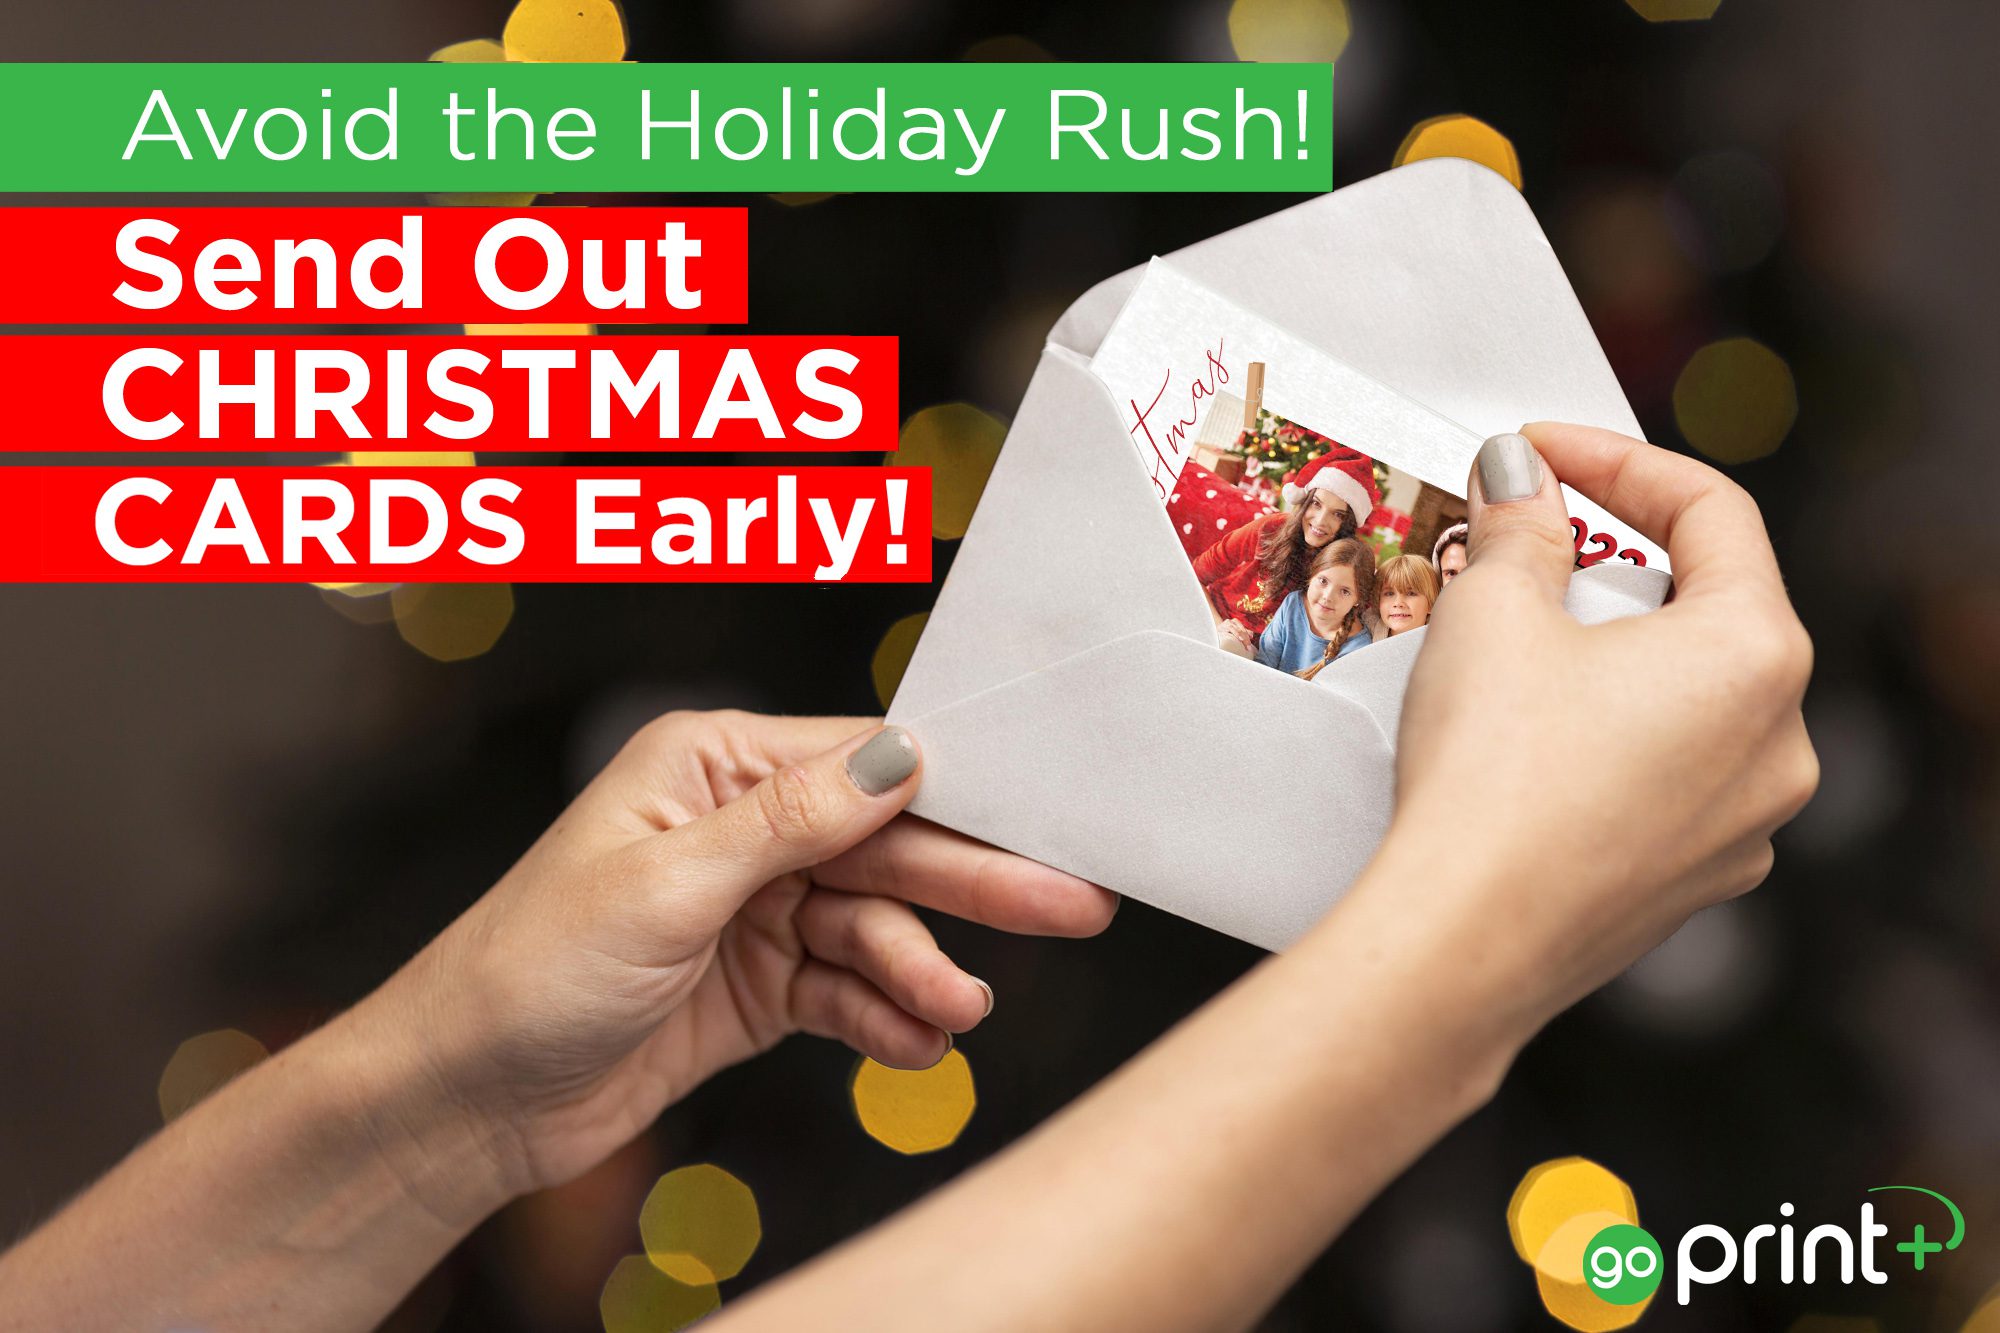 Avoid the Holiday Rush! Send out Christmas Cards Early